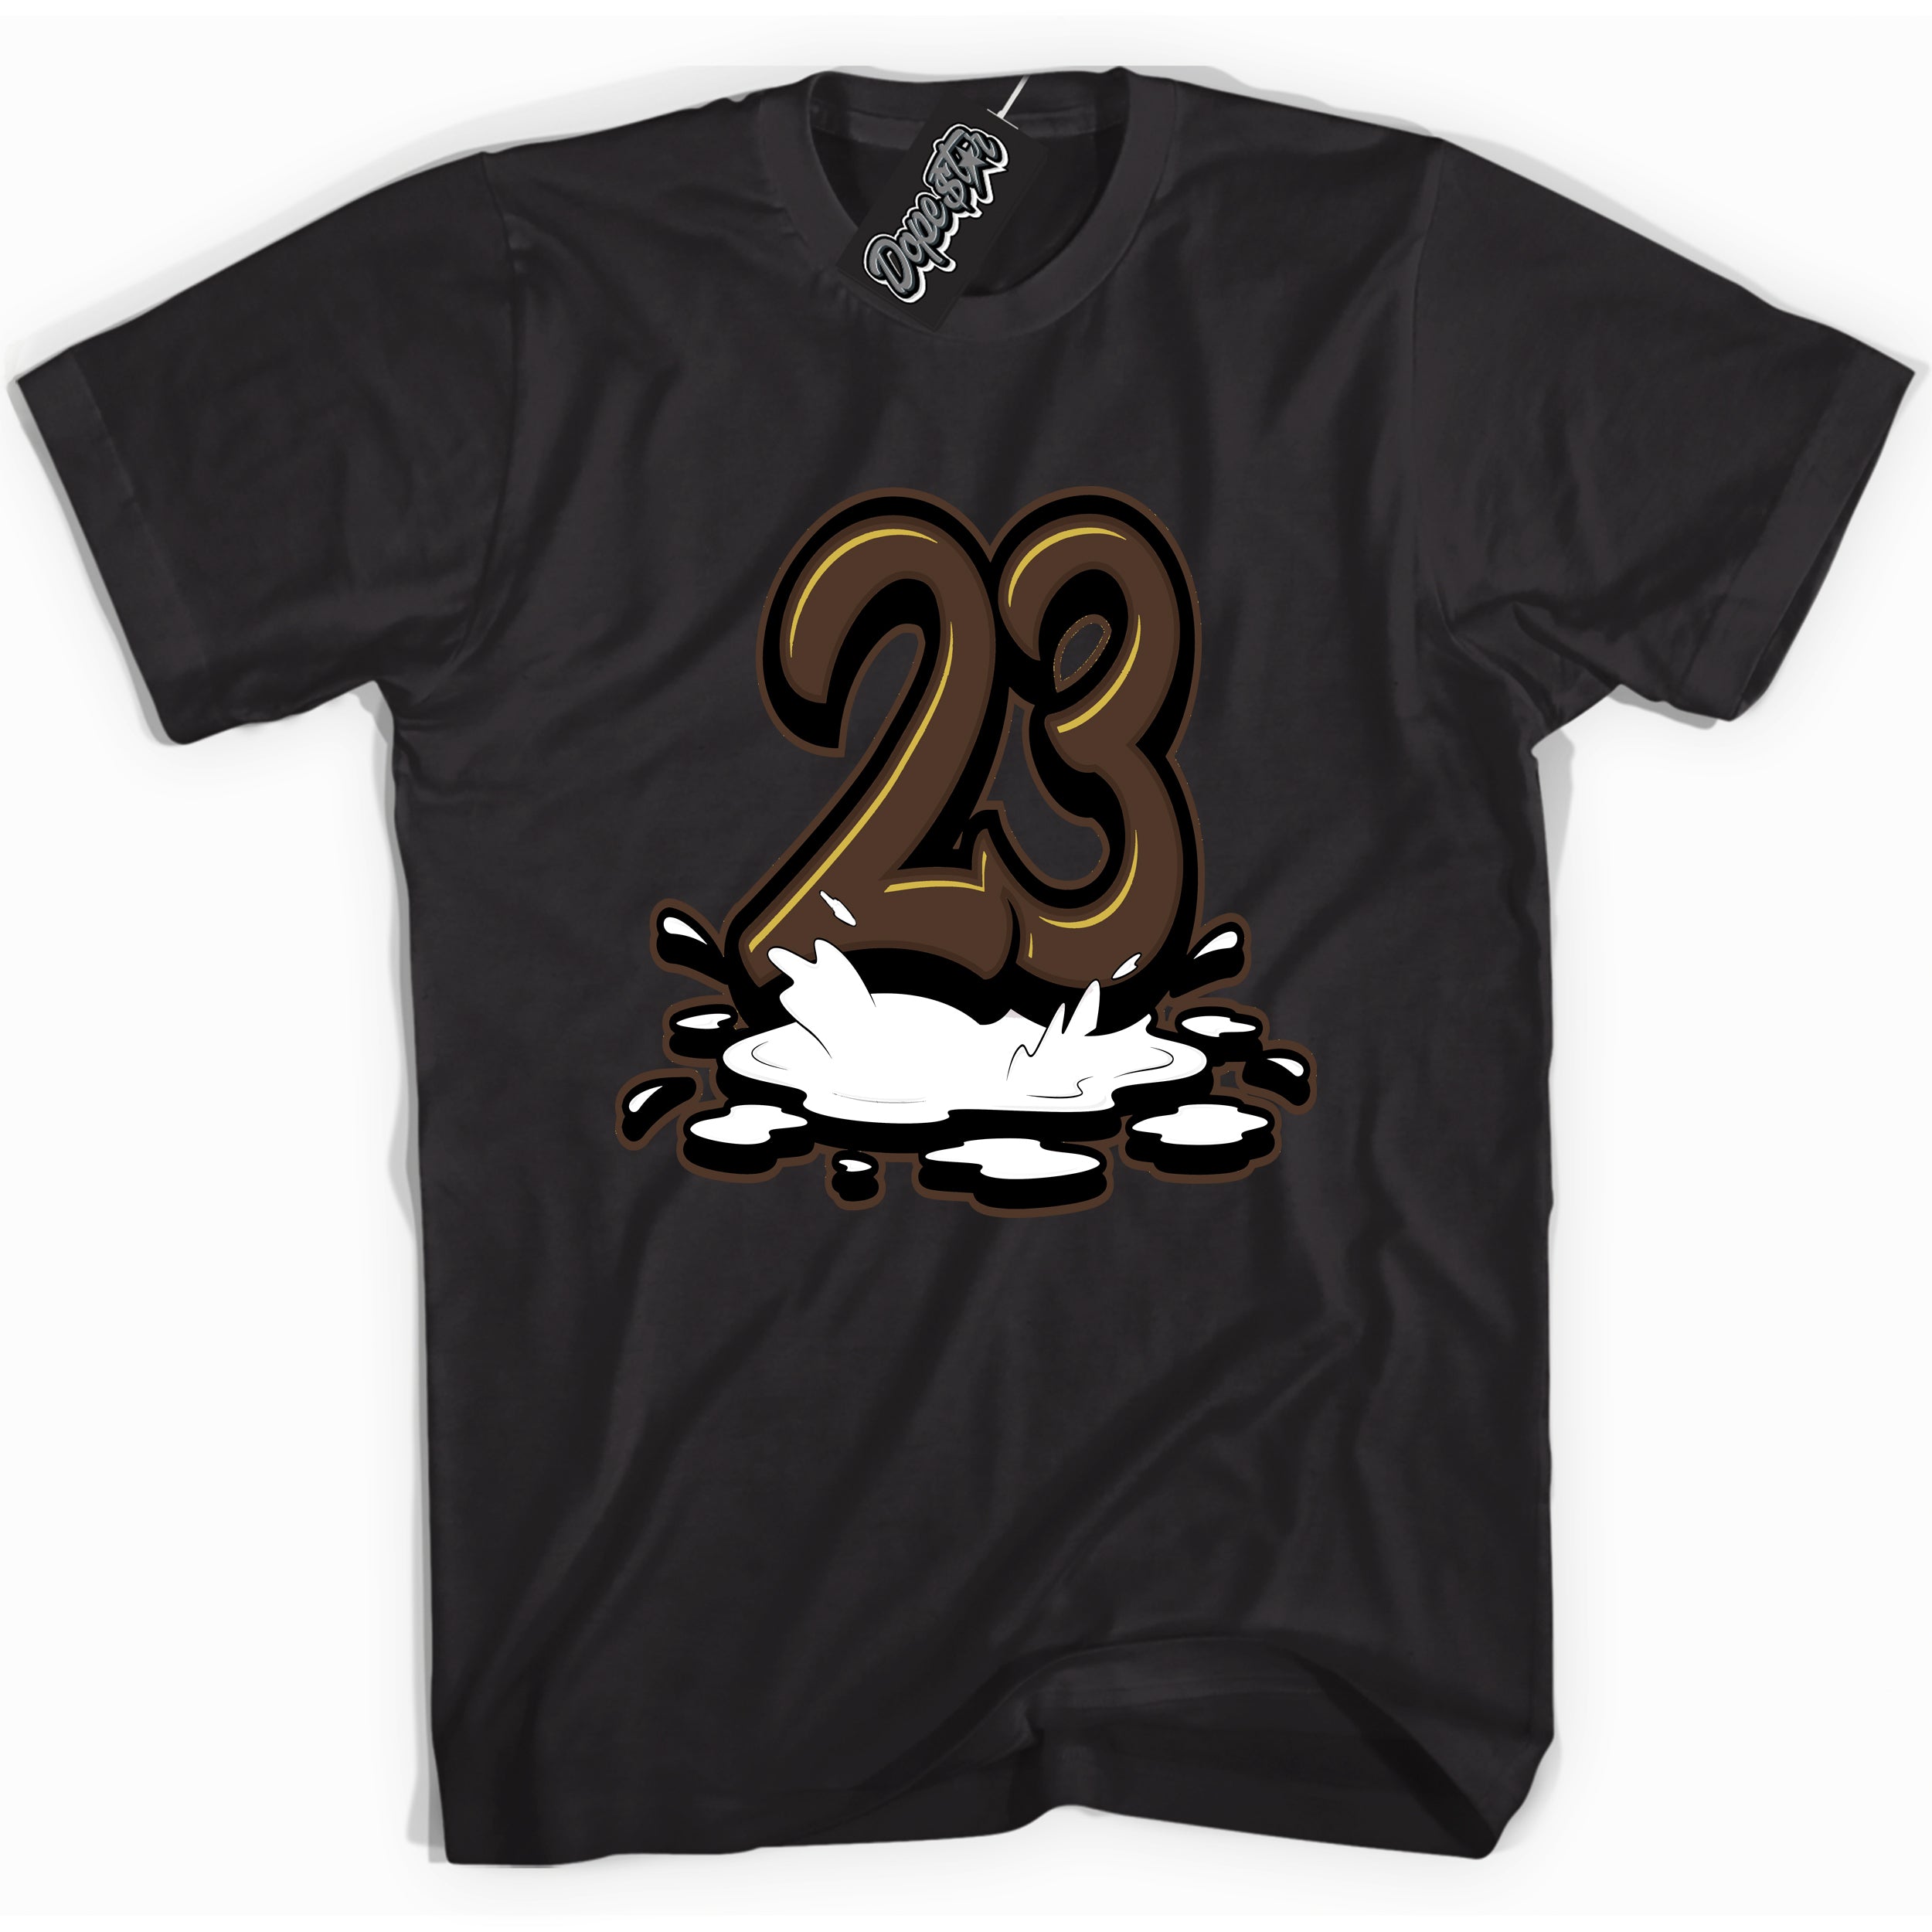 Cool Black graphic tee with “ 23 Melting ” design, that perfectly matches Palomino 1s sneakers 